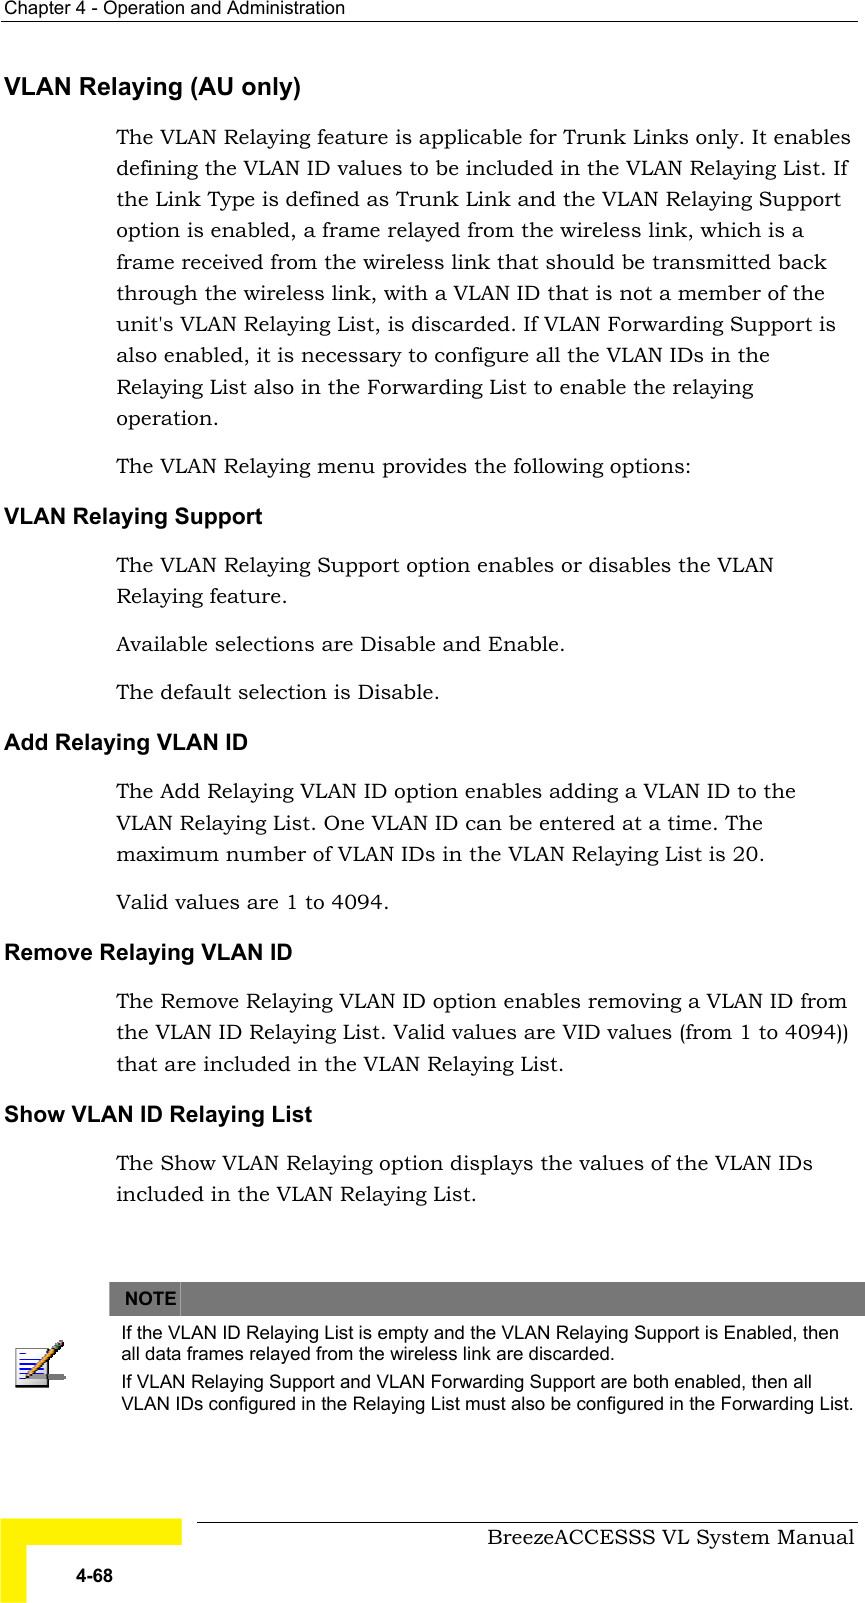 Chapter  4 - Operation and Administration     BreezeACCESSS VL System Manual 4-68 VLAN Relaying (AU only) The VLAN Relaying feature is applicable for Trunk Links only. It enables defining the VLAN ID values to be included in the VLAN Relaying List. If the Link Type is defined as Trunk Link and the VLAN Relaying Support option is enabled, a frame relayed from the wireless link, which is a frame received from the wireless link that should be transmitted back through the wireless link, with a VLAN ID that is not a member of the unit&apos;s VLAN Relaying List, is discarded. If VLAN Forwarding Support is also enabled, it is necessary to configure all the VLAN IDs in the Relaying List also in the Forwarding List to enable the relaying operation. The VLAN Relaying menu provides the following options: VLAN Relaying Support The VLAN Relaying Support option enables or disables the VLAN Relaying feature.  Available selections are Disable and Enable.  The default selection is Disable. Add Relaying VLAN ID The Add Relaying VLAN ID option enables adding a VLAN ID to the VLAN Relaying List. One VLAN ID can be entered at a time. The maximum number of VLAN IDs in the VLAN Relaying List is 20.  Valid values are 1 to 4094. Remove Relaying VLAN ID The Remove Relaying VLAN ID option enables removing a VLAN ID from the VLAN ID Relaying List. Valid values are VID values (from 1 to 4094)) that are included in the VLAN Relaying List. Show VLAN ID Relaying List The Show VLAN Relaying option displays the values of the VLAN IDs included in the VLAN Relaying List.      NOTE    If the VLAN ID Relaying List is empty and the VLAN Relaying Support is Enabled, then all data frames relayed from the wireless link are discarded.  If VLAN Relaying Support and VLAN Forwarding Support are both enabled, then all VLAN IDs configured in the Relaying List must also be configured in the Forwarding List. 